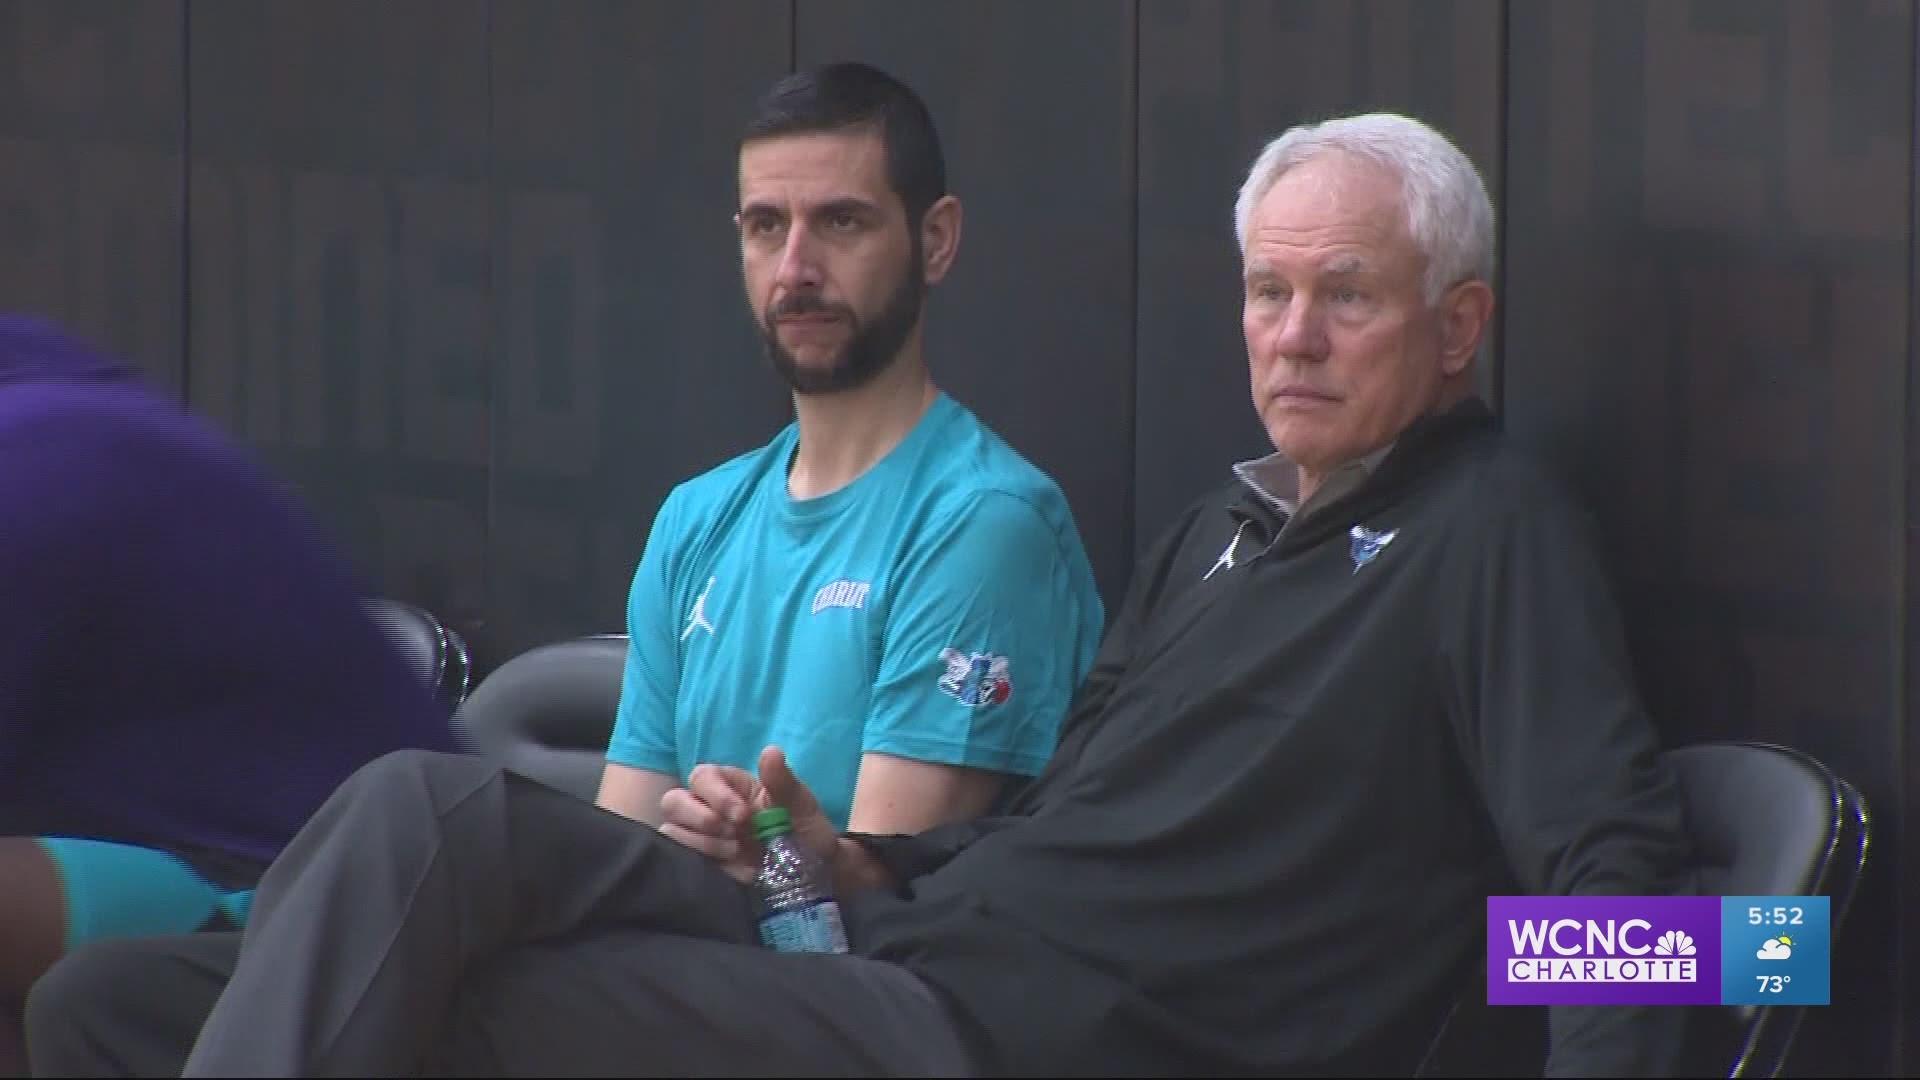 The Charlotte Hornets are looking to change their style of play under new coach James Borrego.